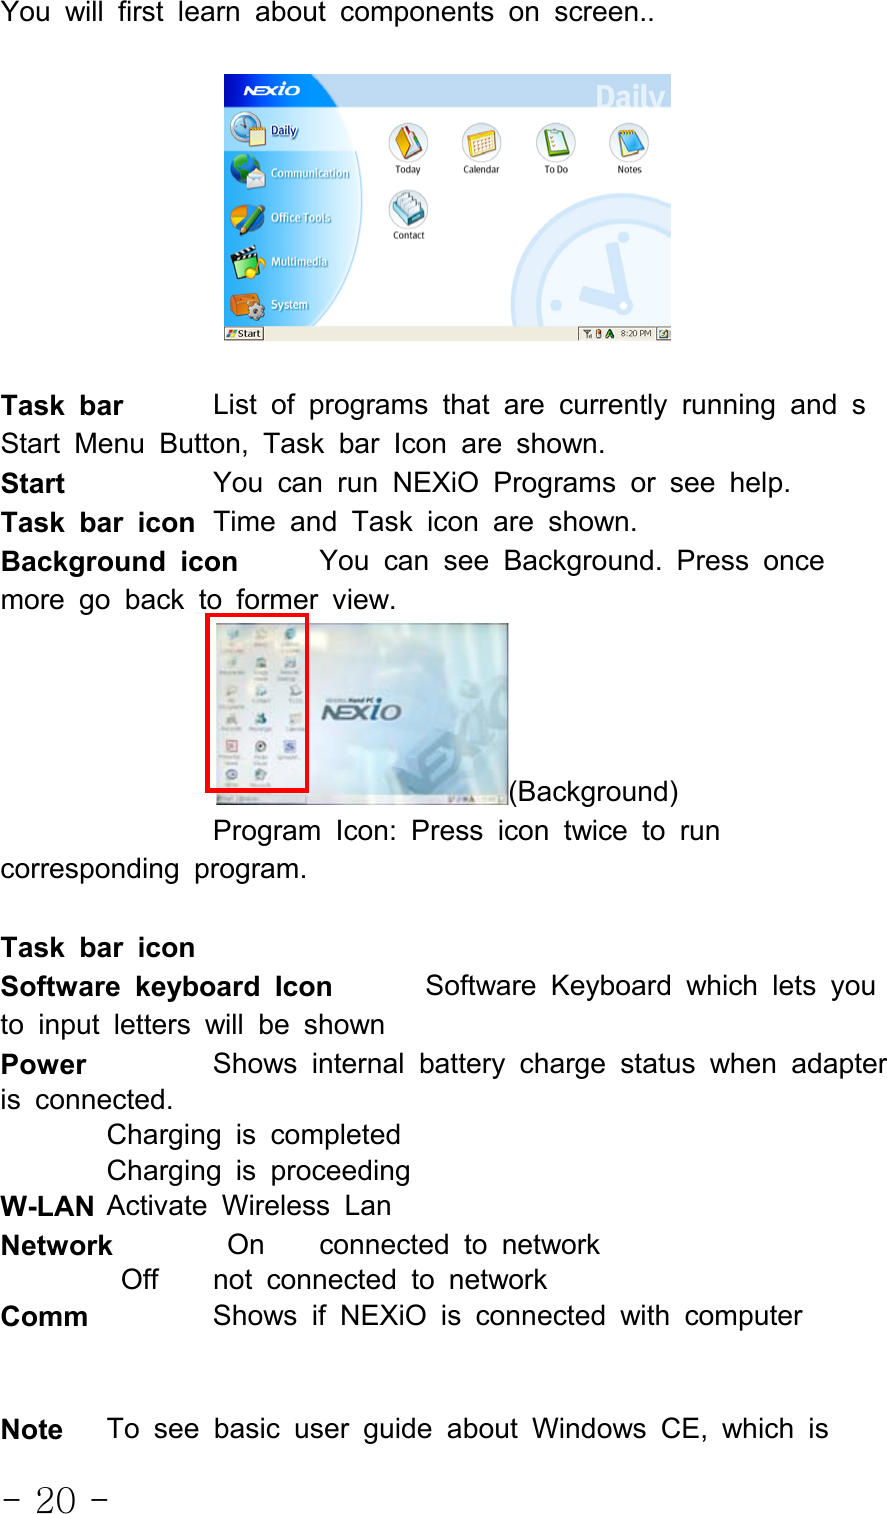 - 20 -You will first learn about components on screen..Task bar List of programs that are currently running and sStart Menu Button, Task bar Icon are shown.Start You can run NEXiO Programs or see help.Task bar icon Time and Task icon are shown.Background icon You can see Background. Press oncemore go back to former view.(Background)Program Icon: Press icon twice to runcorresponding program.Task bar iconSoftware keyboard Icon Software Keyboard which lets youto input letters will be shownPower Shows internal battery charge status when adapteris connected.Charging is completedCharging is proceedingW-LAN Activate Wireless LanNetwork On connected to networkOff not connected to networkComm Shows if NEXiO is connected with computerNote To see basic user guide about Windows CE, which is